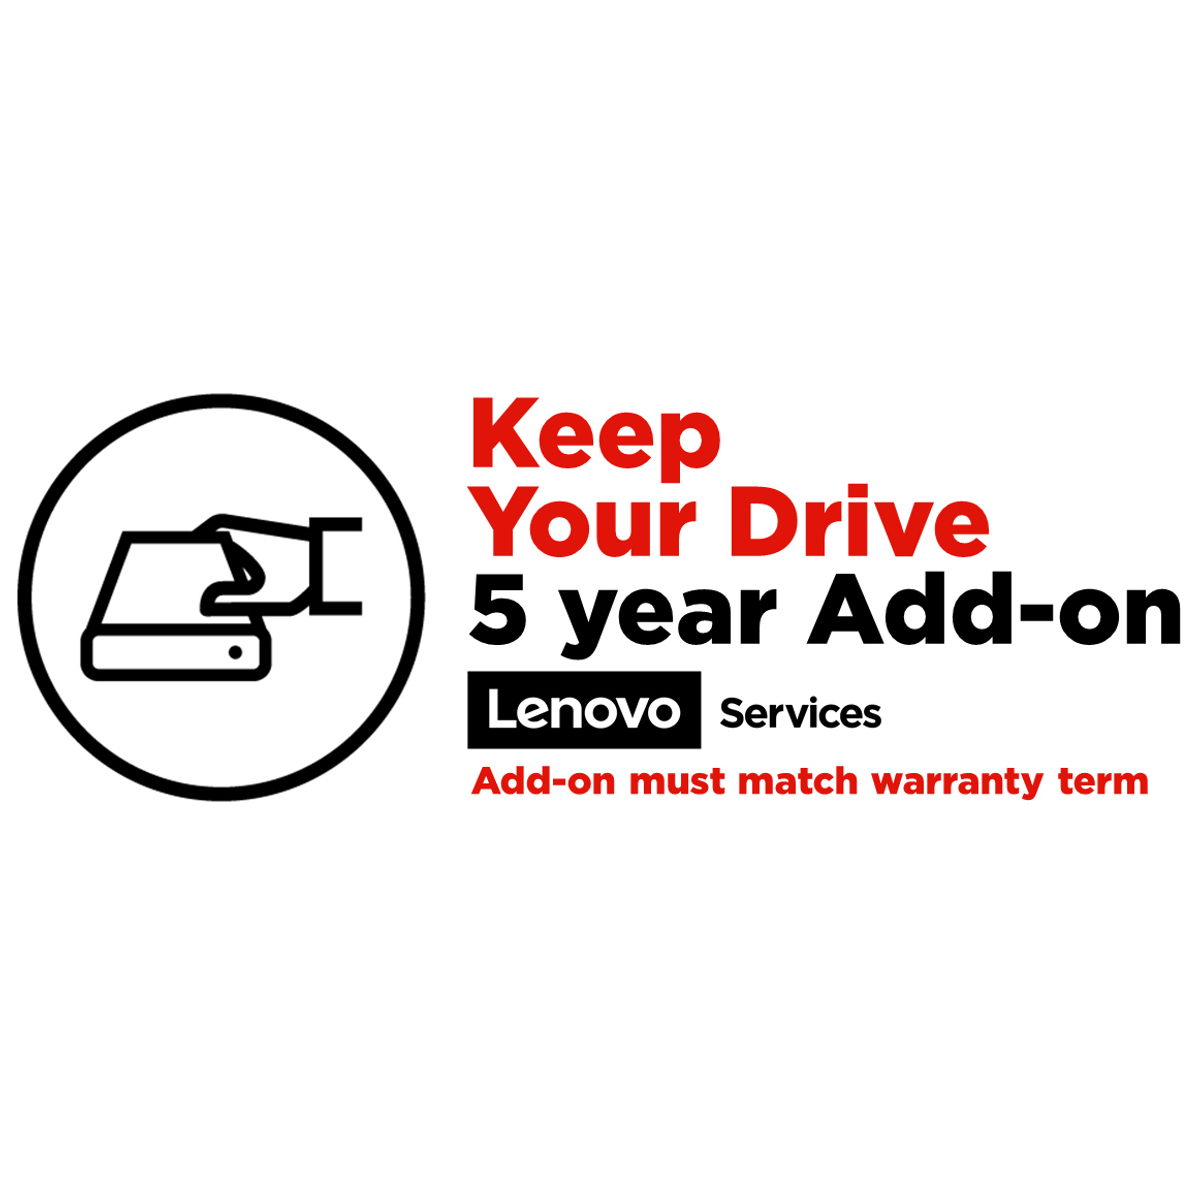 5yr KYDcompatible with Onsite delivery